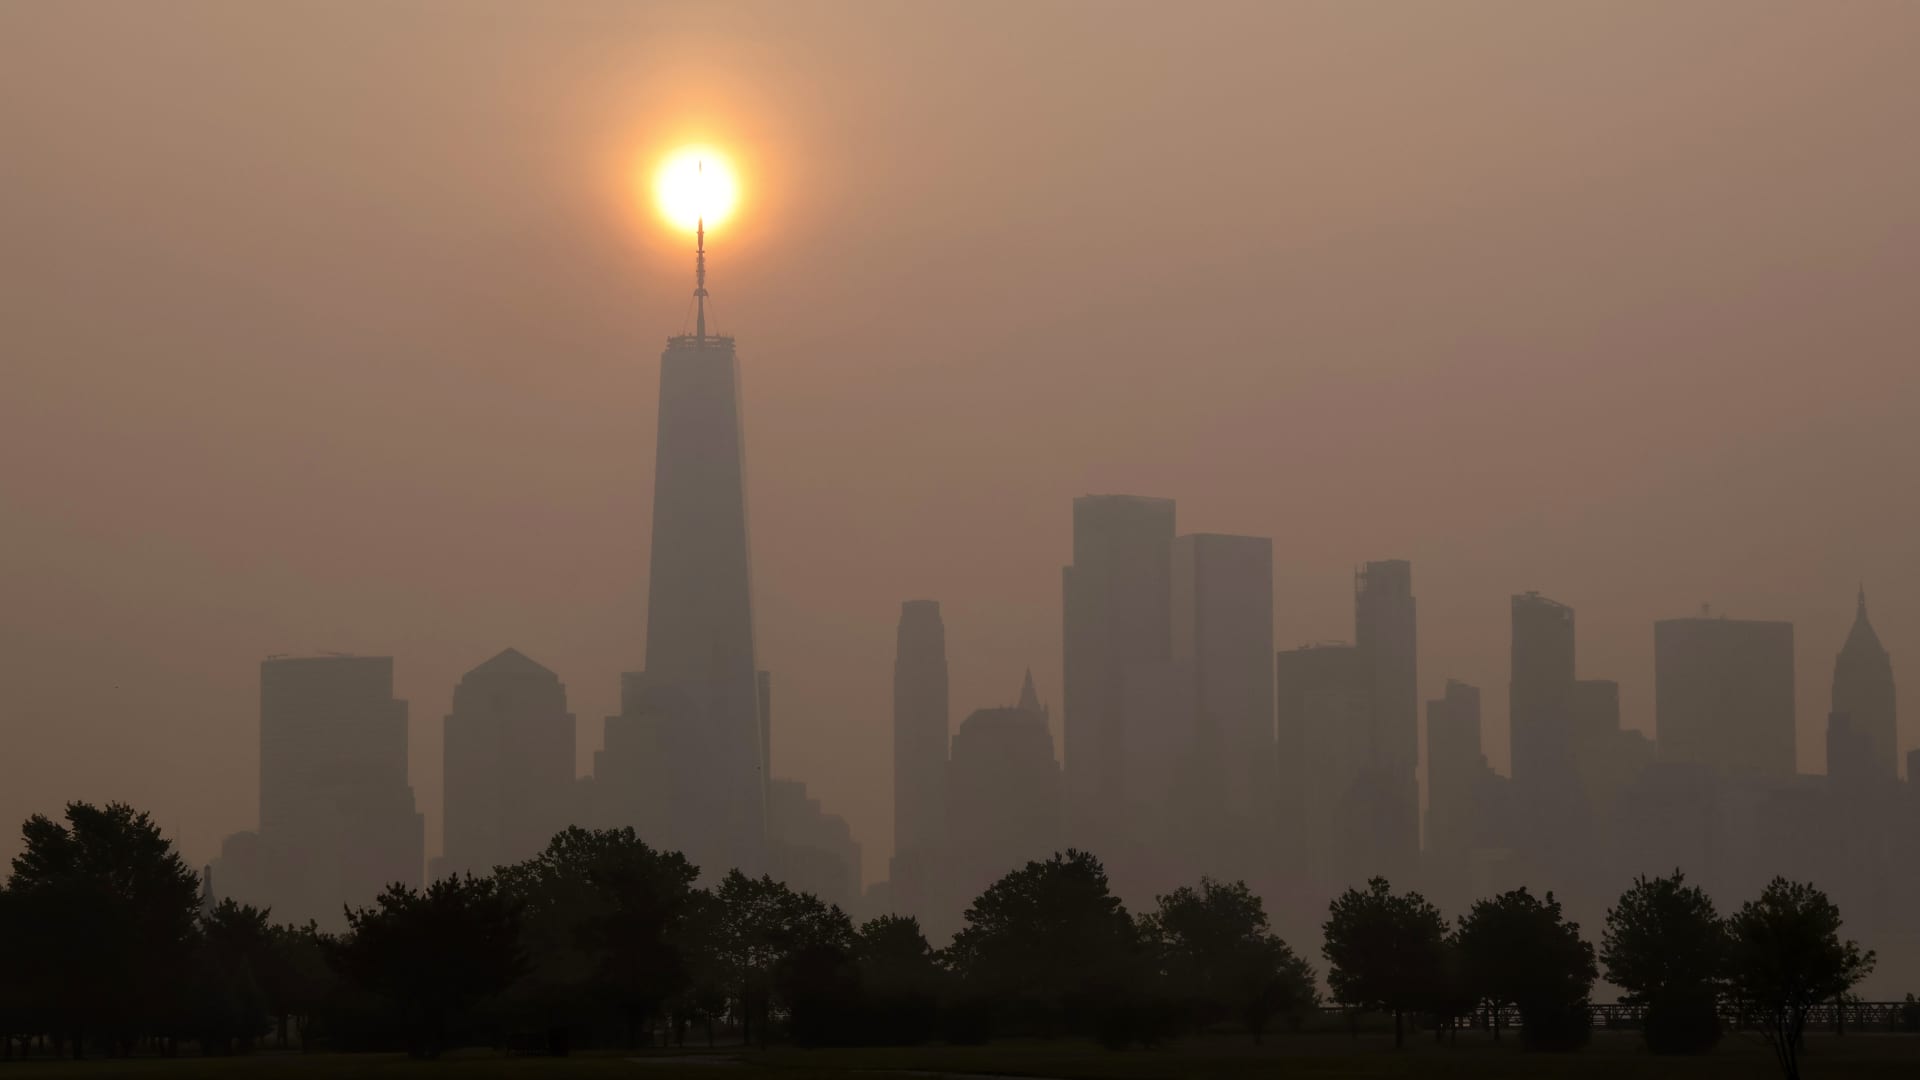 Smoke shrouds the skyline of lower Manhattan and One World Trade Center as the sun rises in New York City on June 30, 2023, as seen from Jersey City, New Jersey.